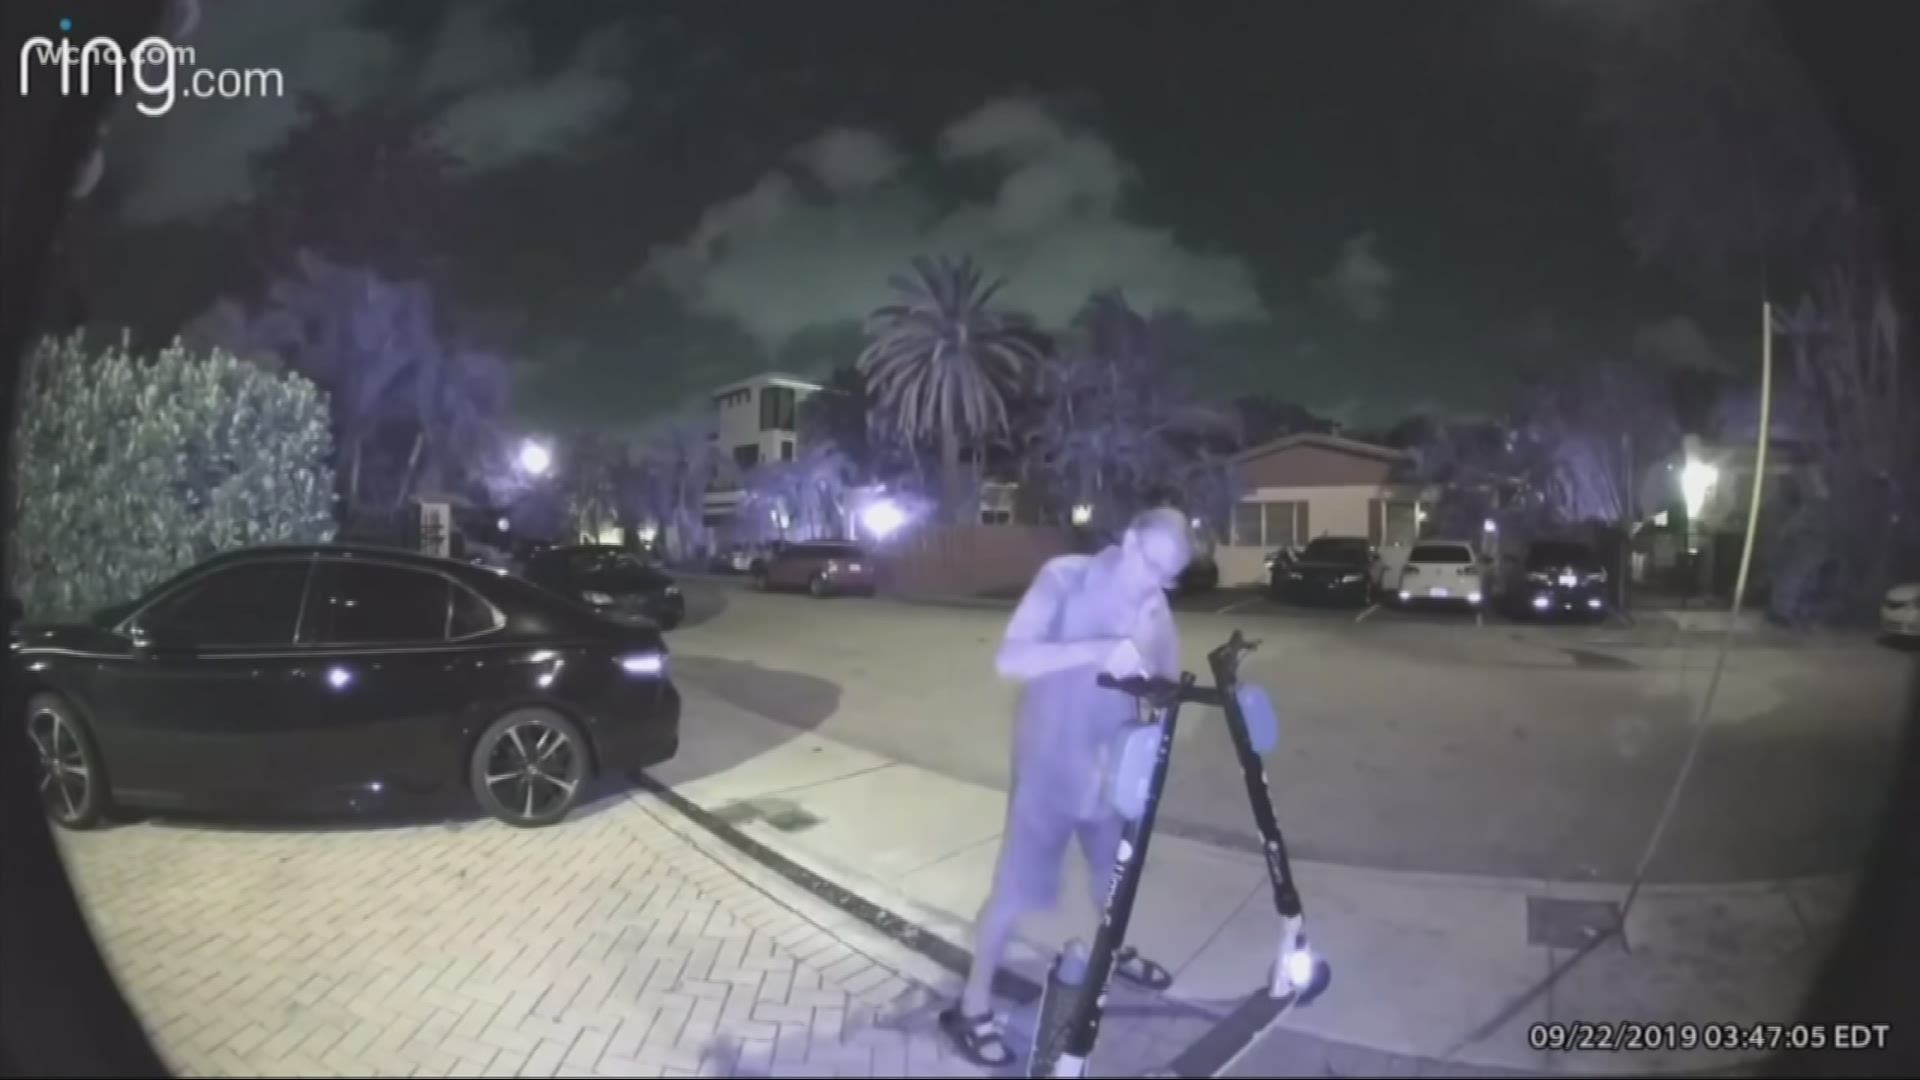 A troubling case of vandalism in Florida is raising safety concerns about e-scooters.